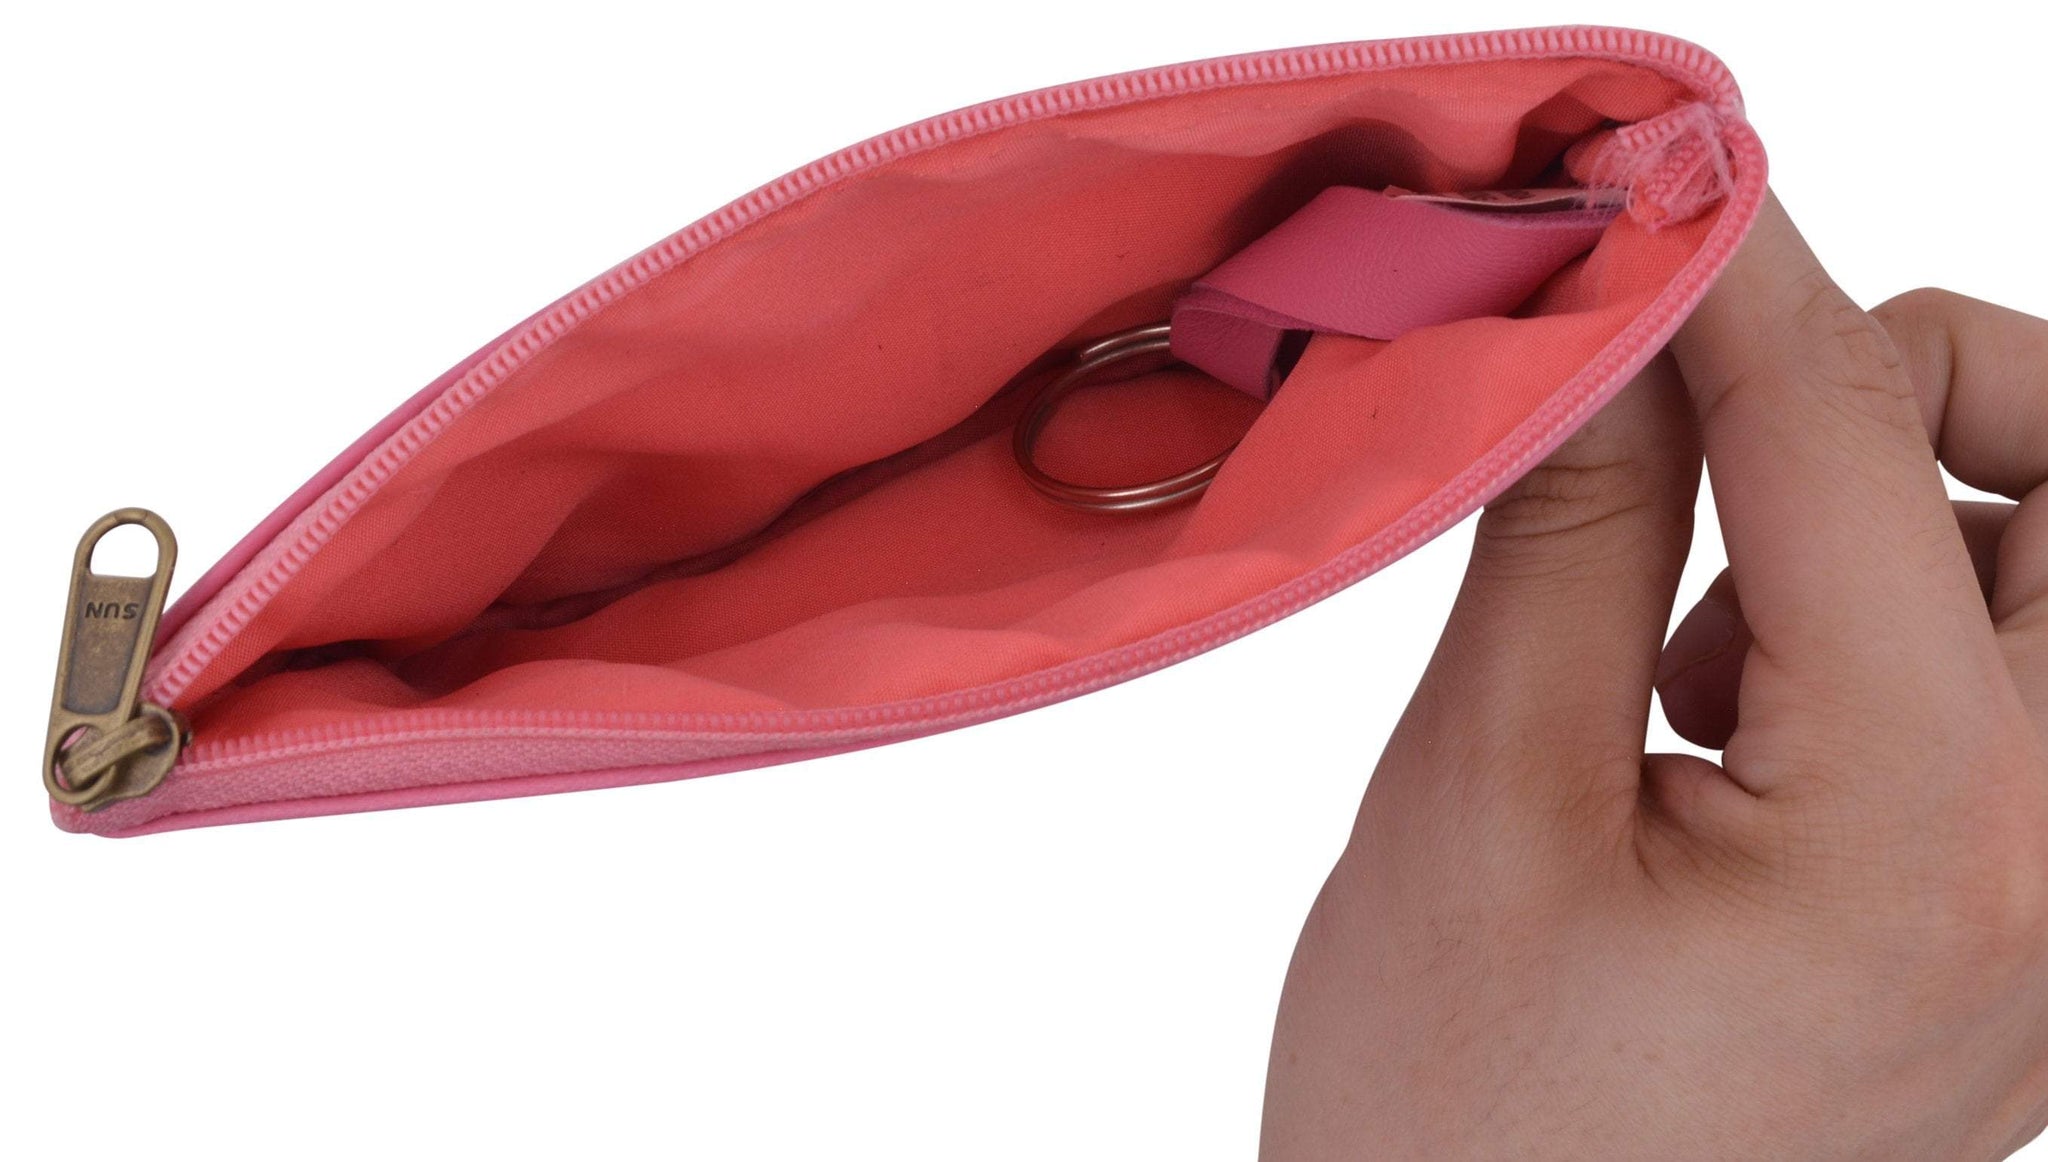  Genuine Leather Coin Pouch Change Holder for Men/Woman